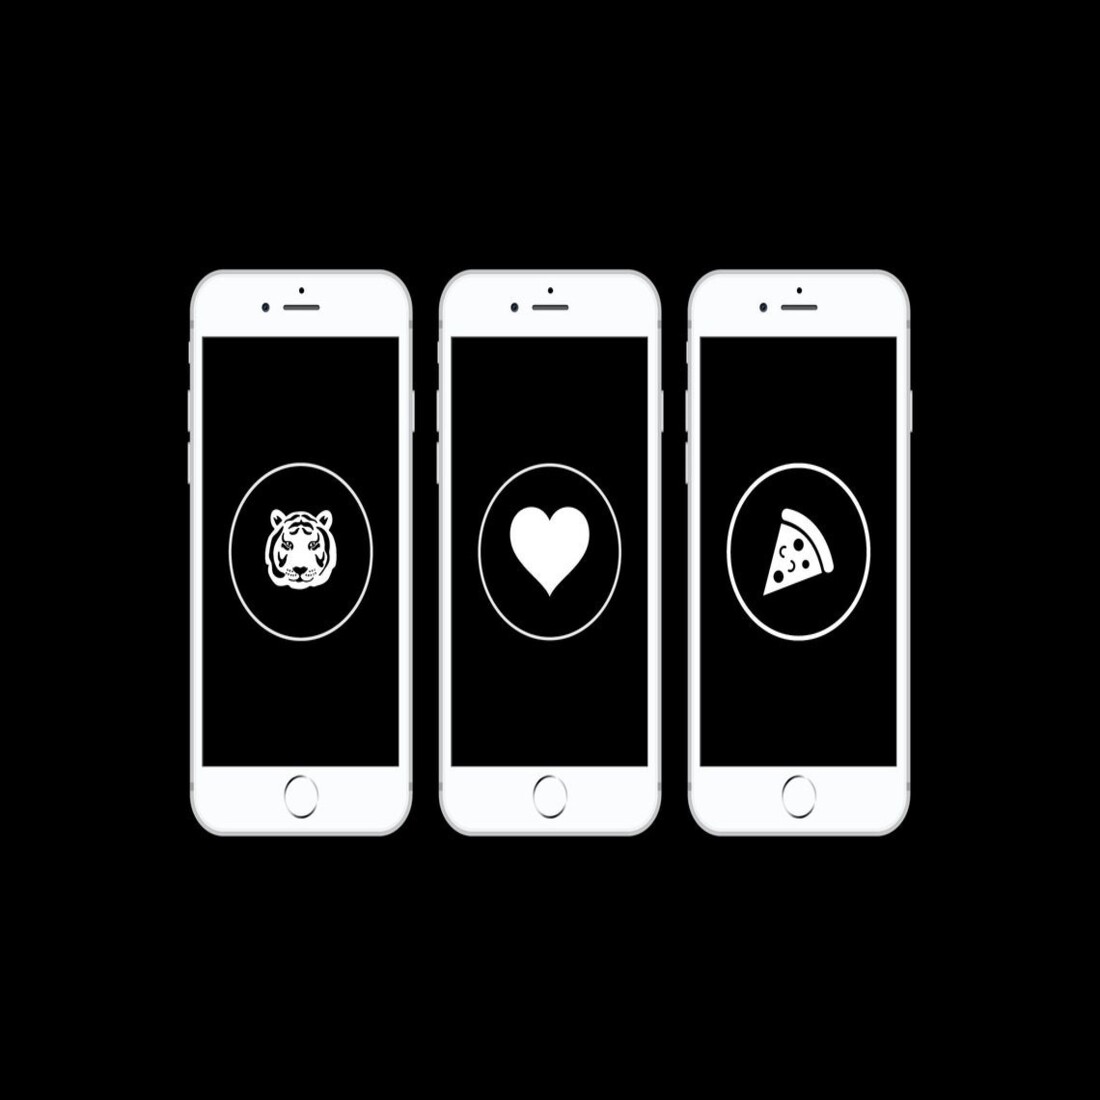 54 Black and White Minimalist Instagram Story Icons facebook image.